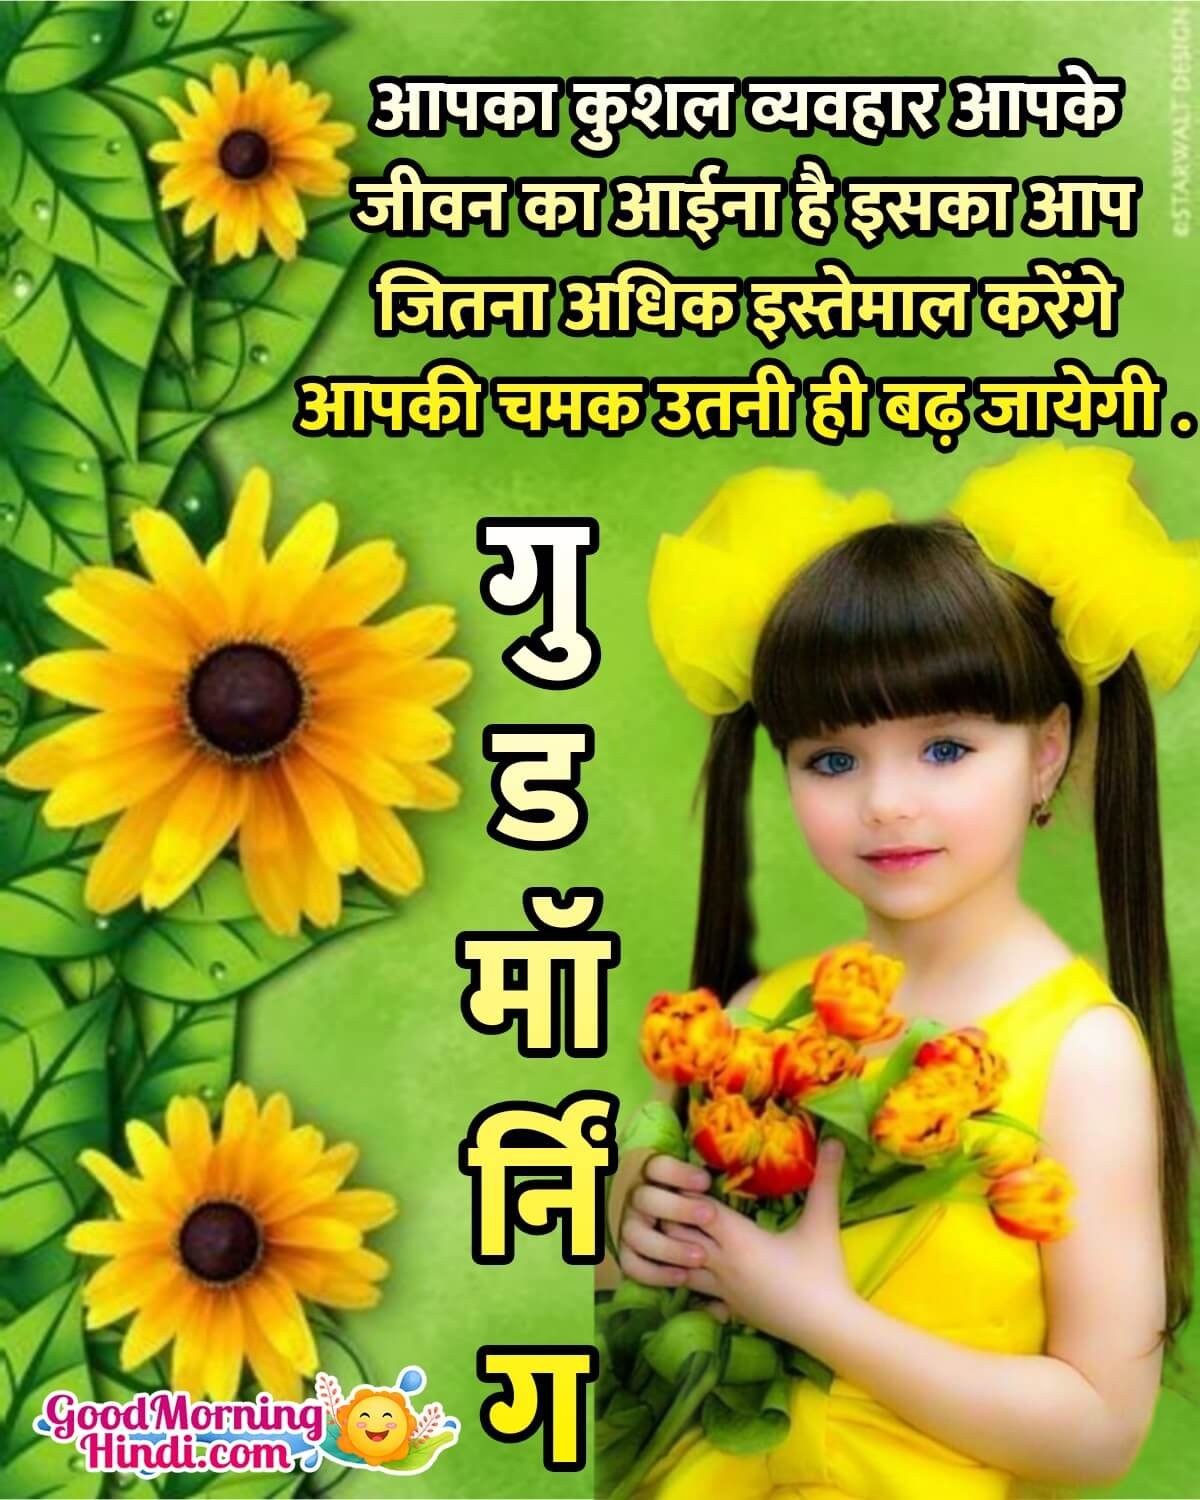 Good Morning Images In Hindi - Good Morning Wishes & Images In Hindi